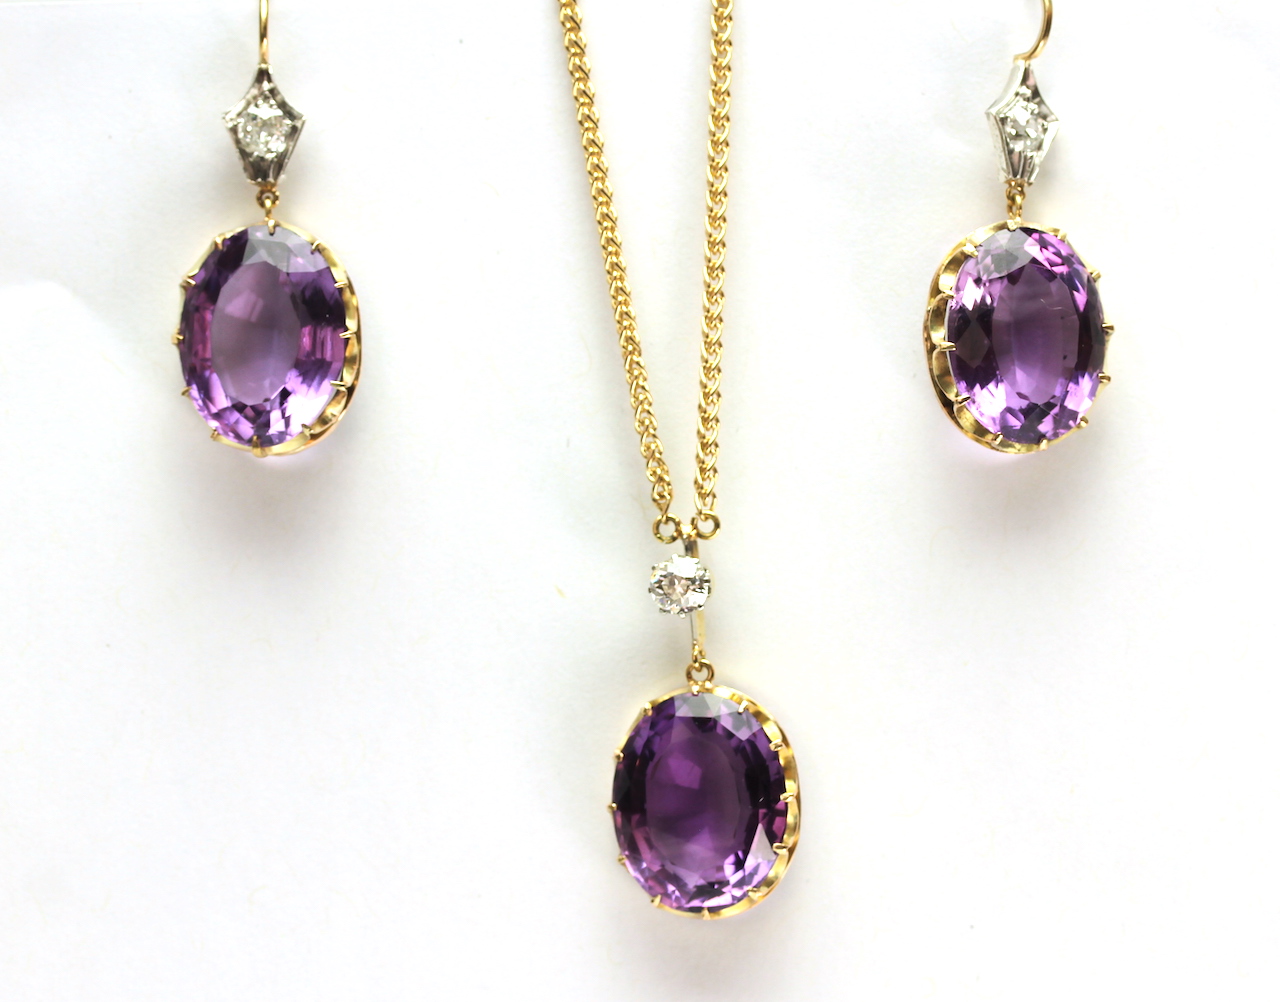 Early 20th Century Amethyst and Old Cut Diamond Pendant and Earring Set, approximately 16x12mm